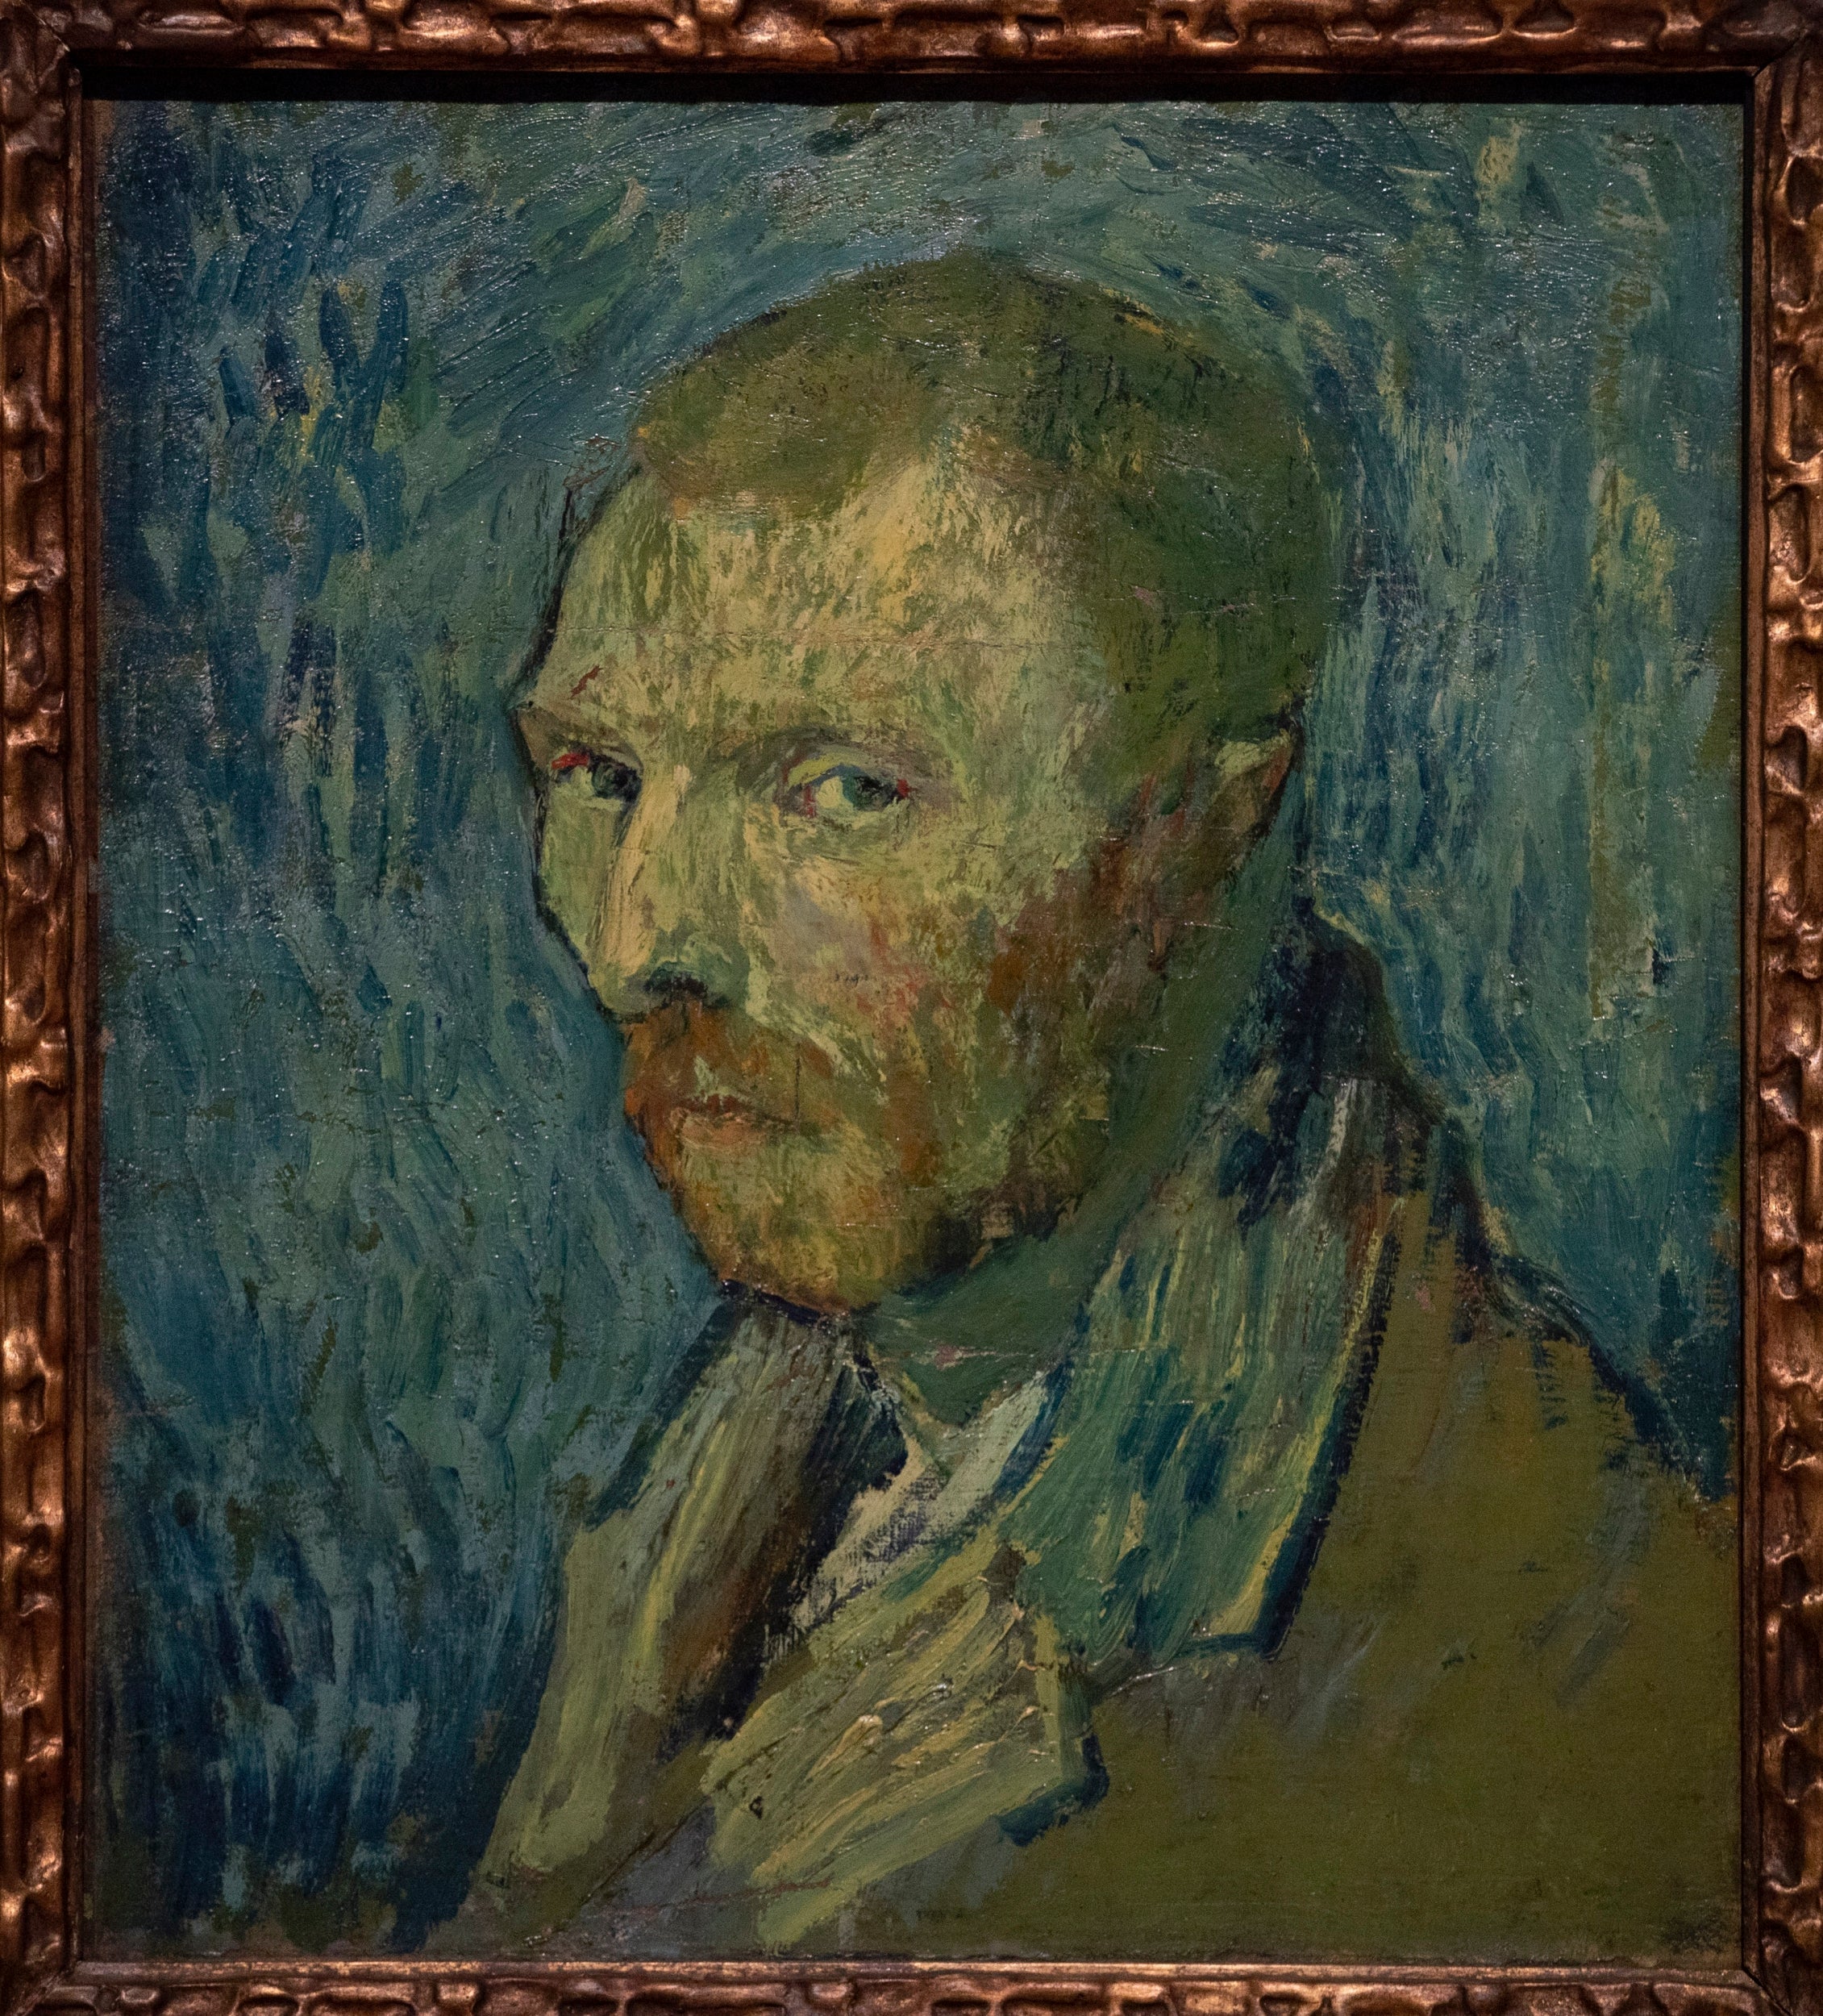 &#13;
‘Self-Portrait’ (1889): The average Van Gogh painting sells for millions at auction &#13;